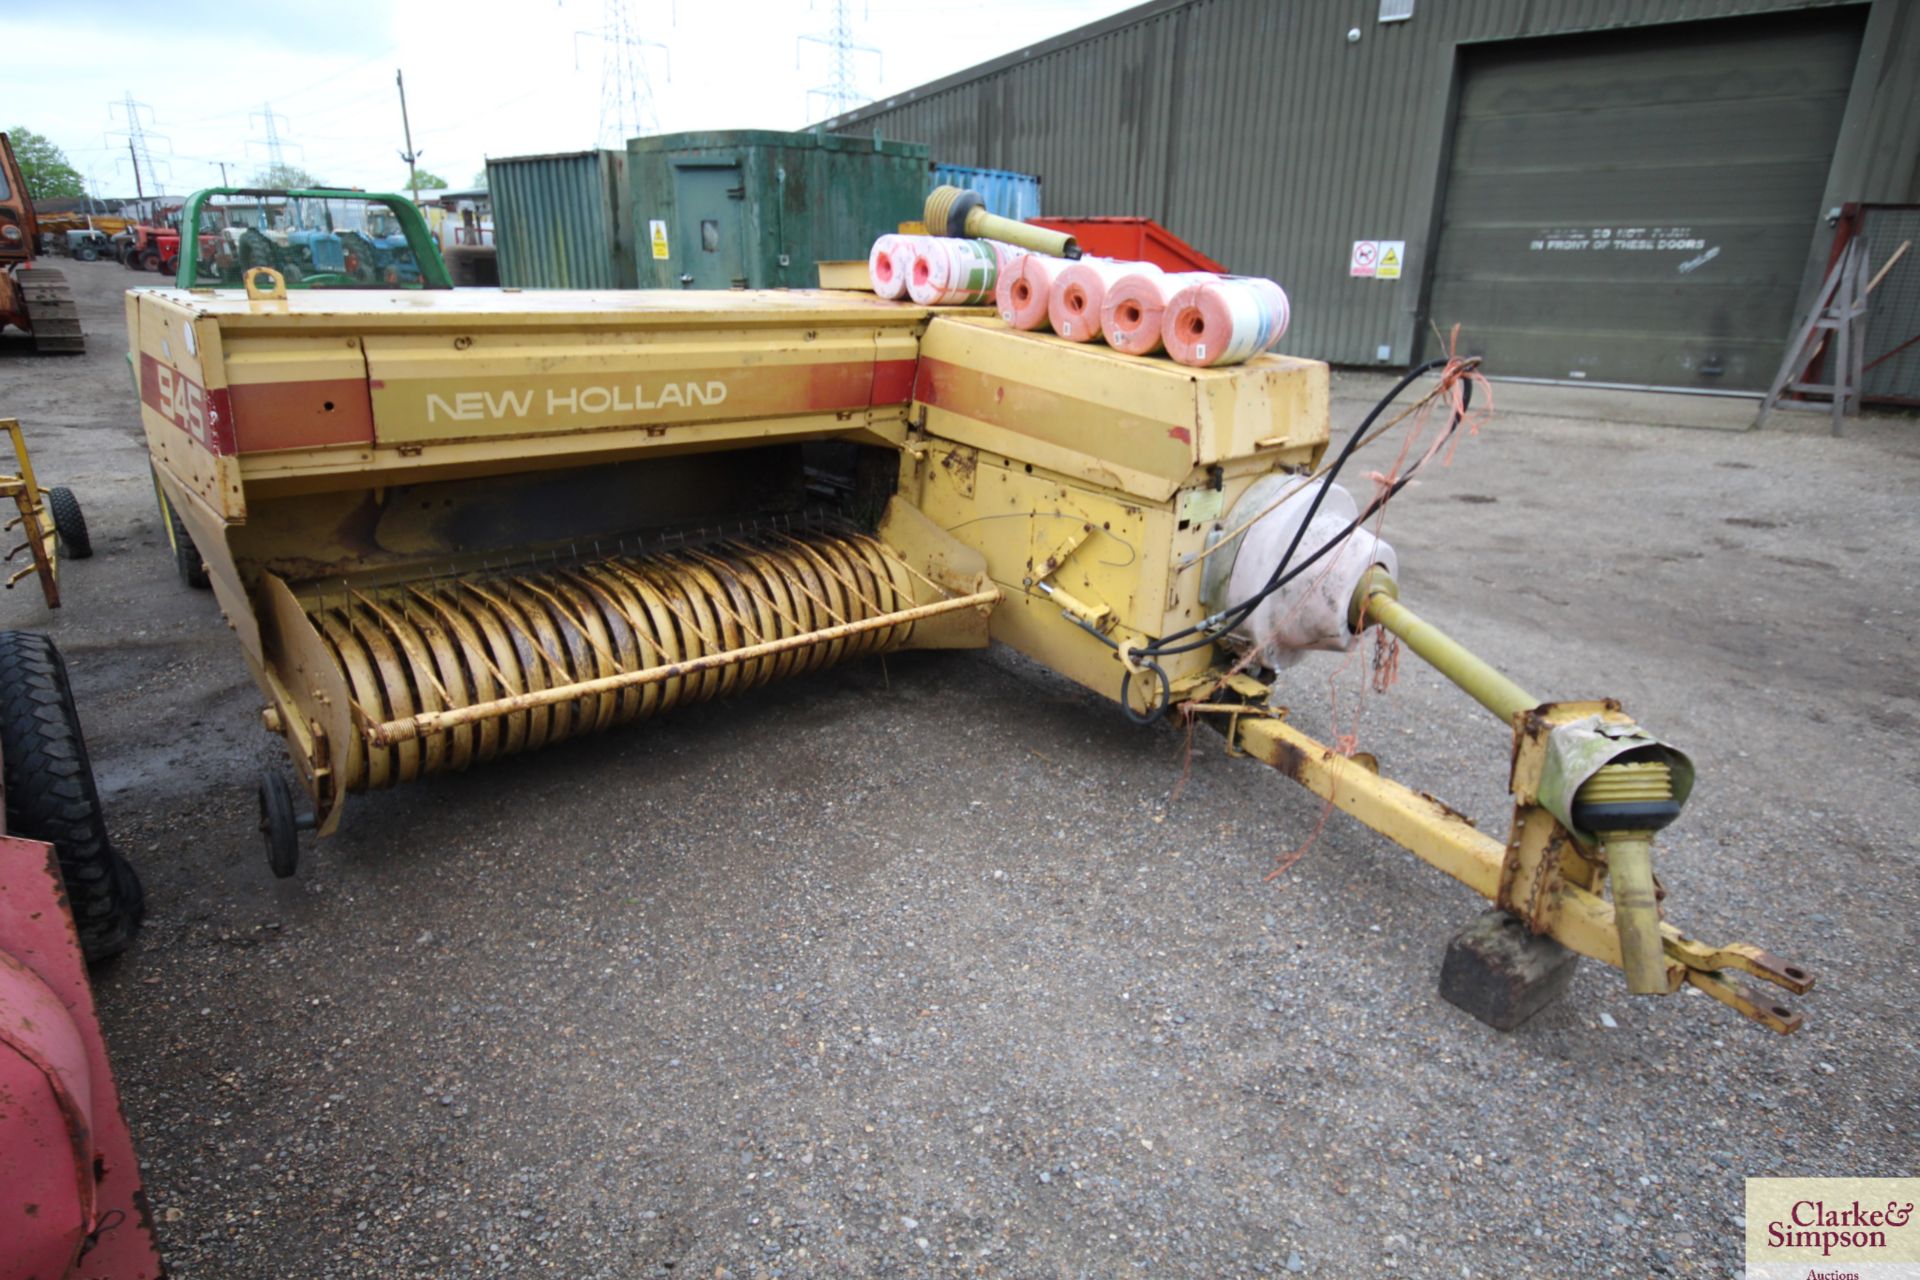 New Holland 945 conventional baler. Serial number 145. With a large quantity of twine. From a